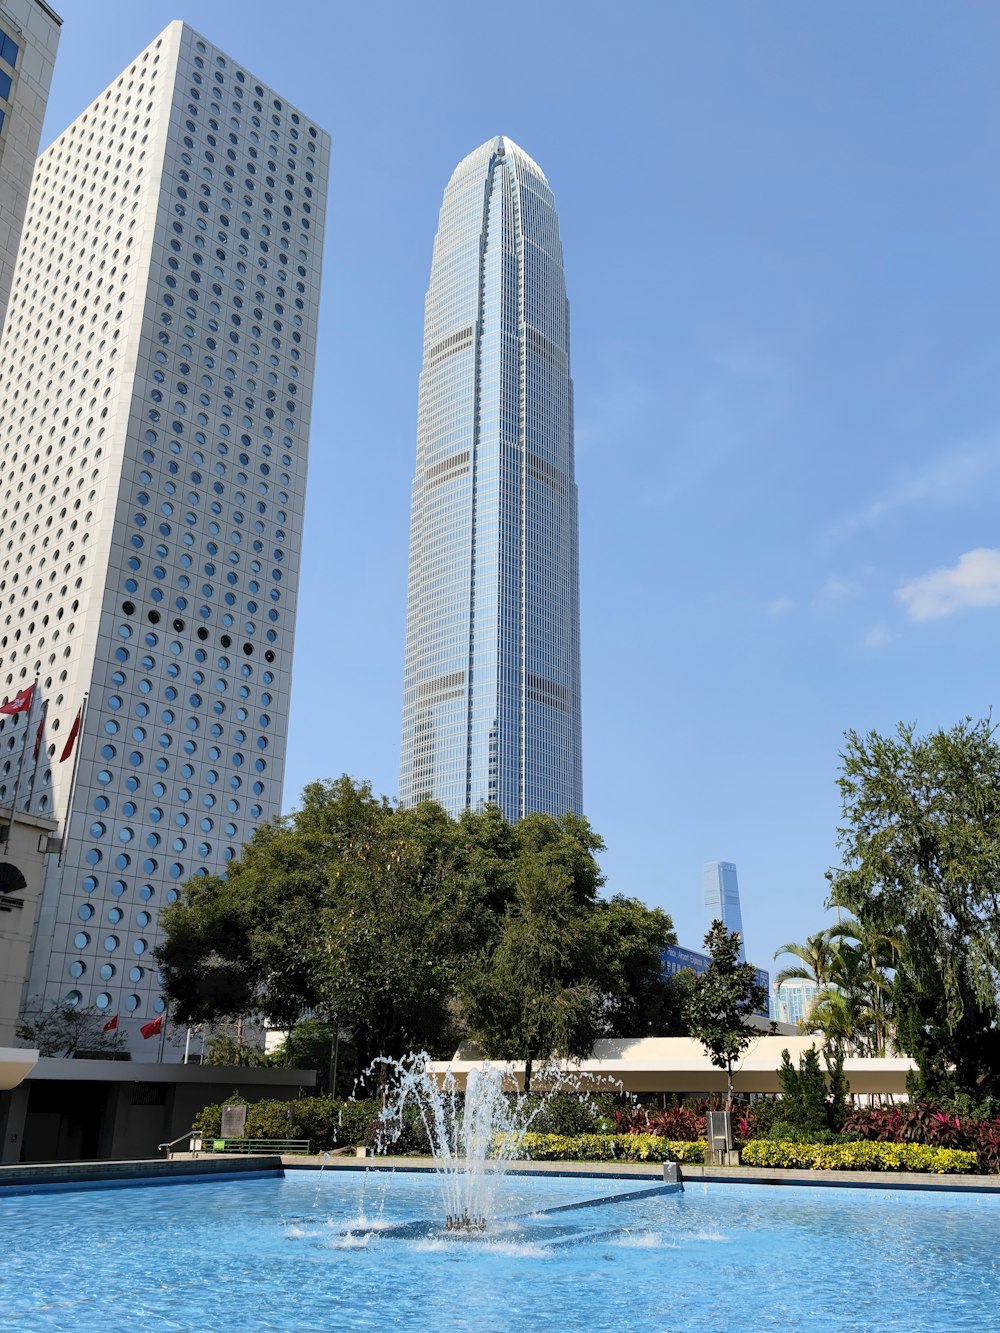 a fountain in the middle of a park with skyscrapers in the background